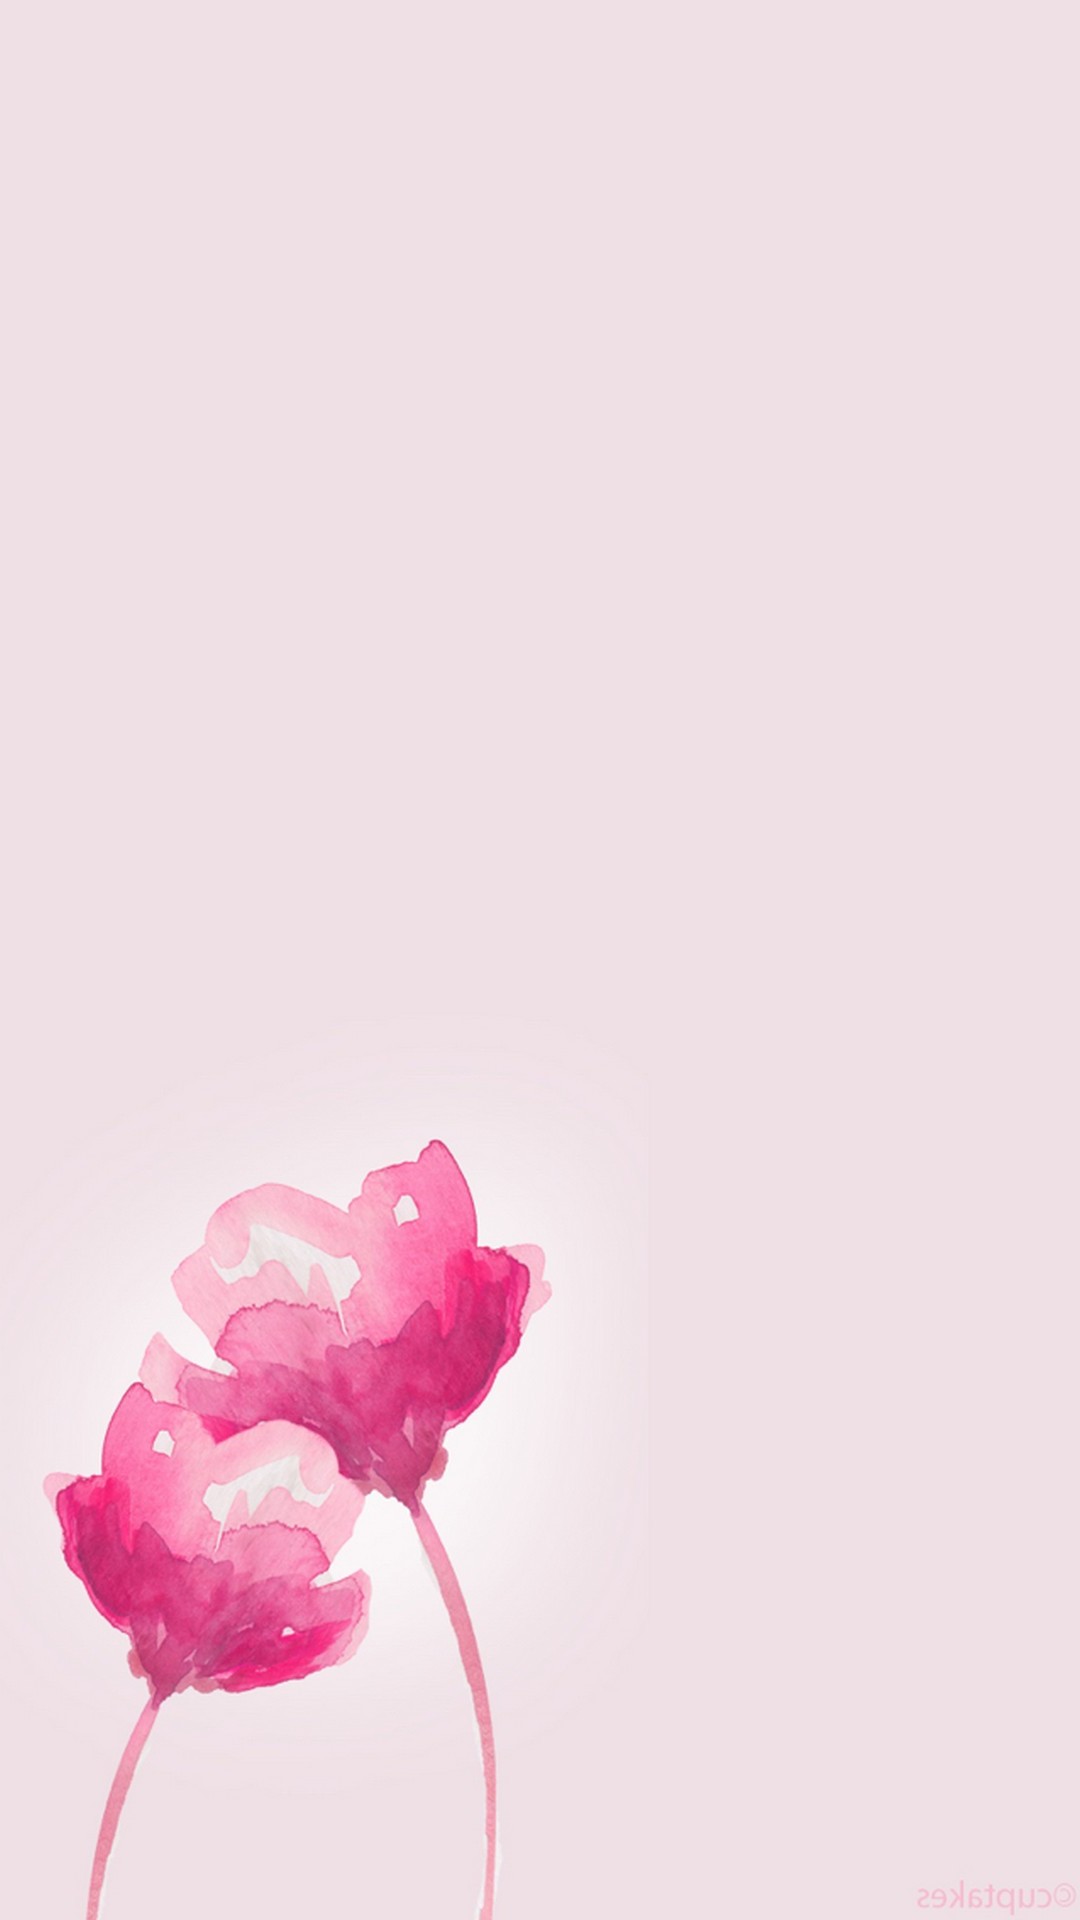 Animated Pink Flower Wallpaper 1080x1920